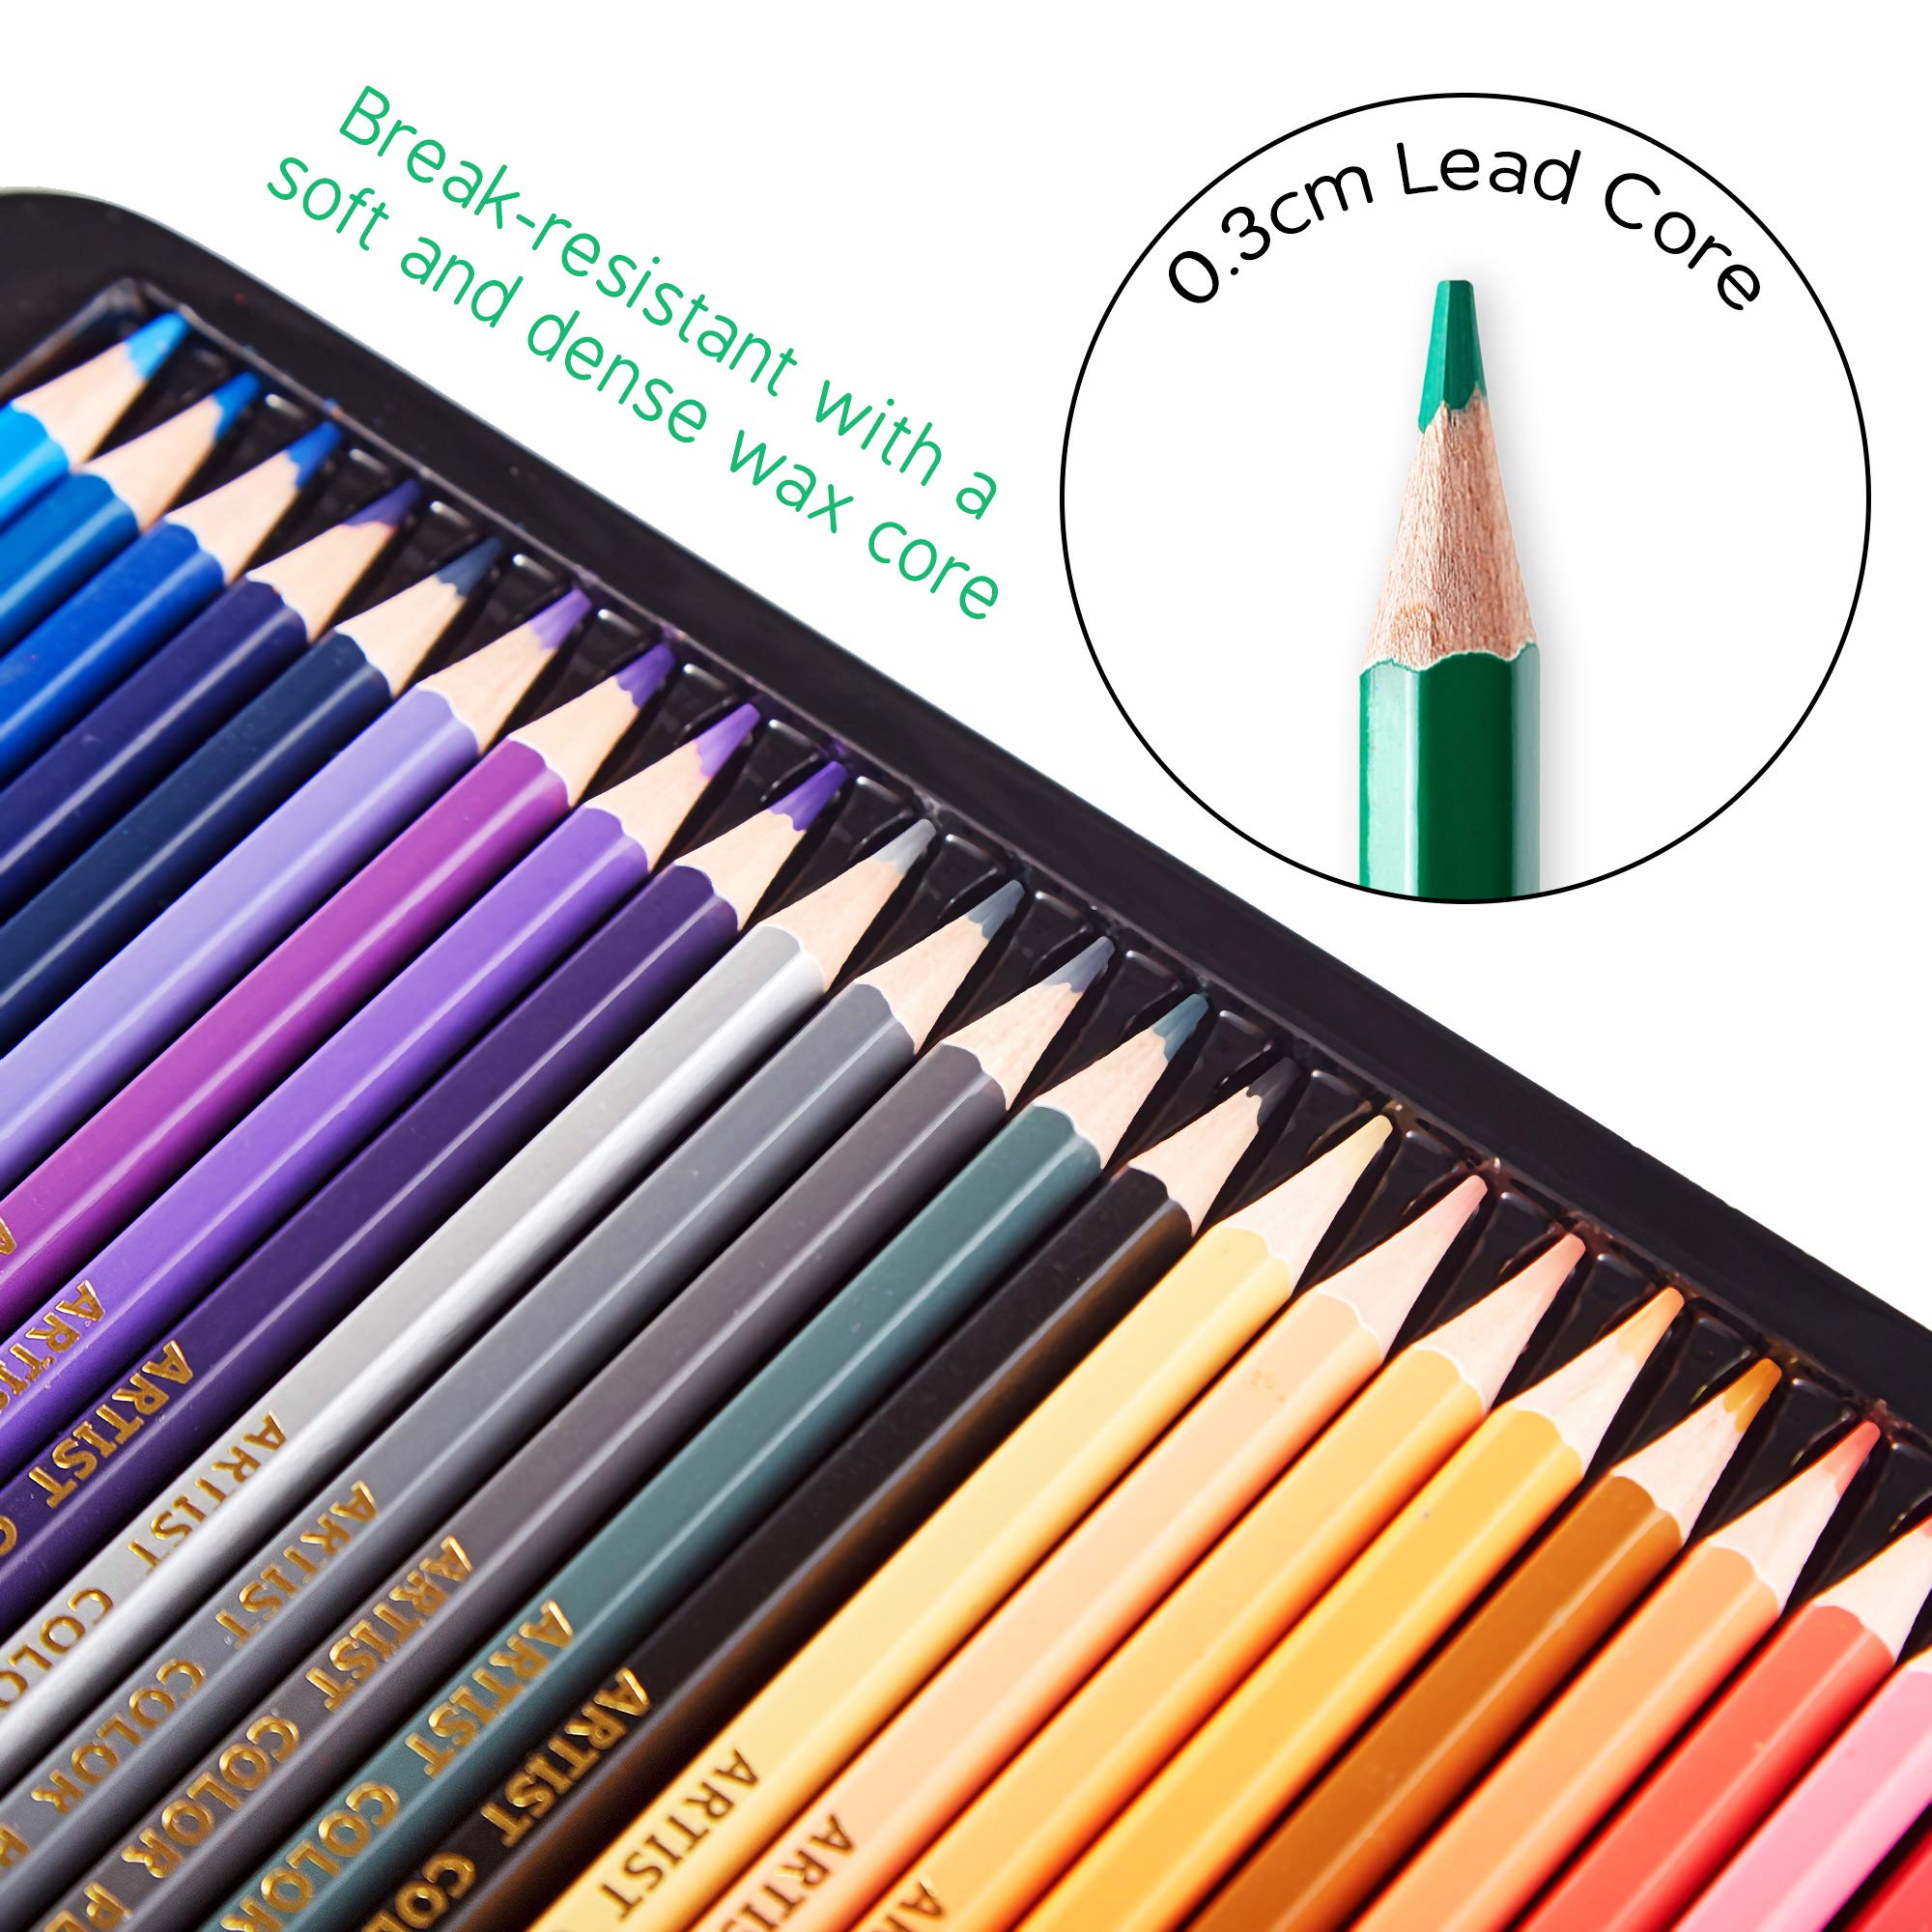 AOOKMIYA 300-Colors Colored Pencils for Adult Coloring Books, Soft Cor